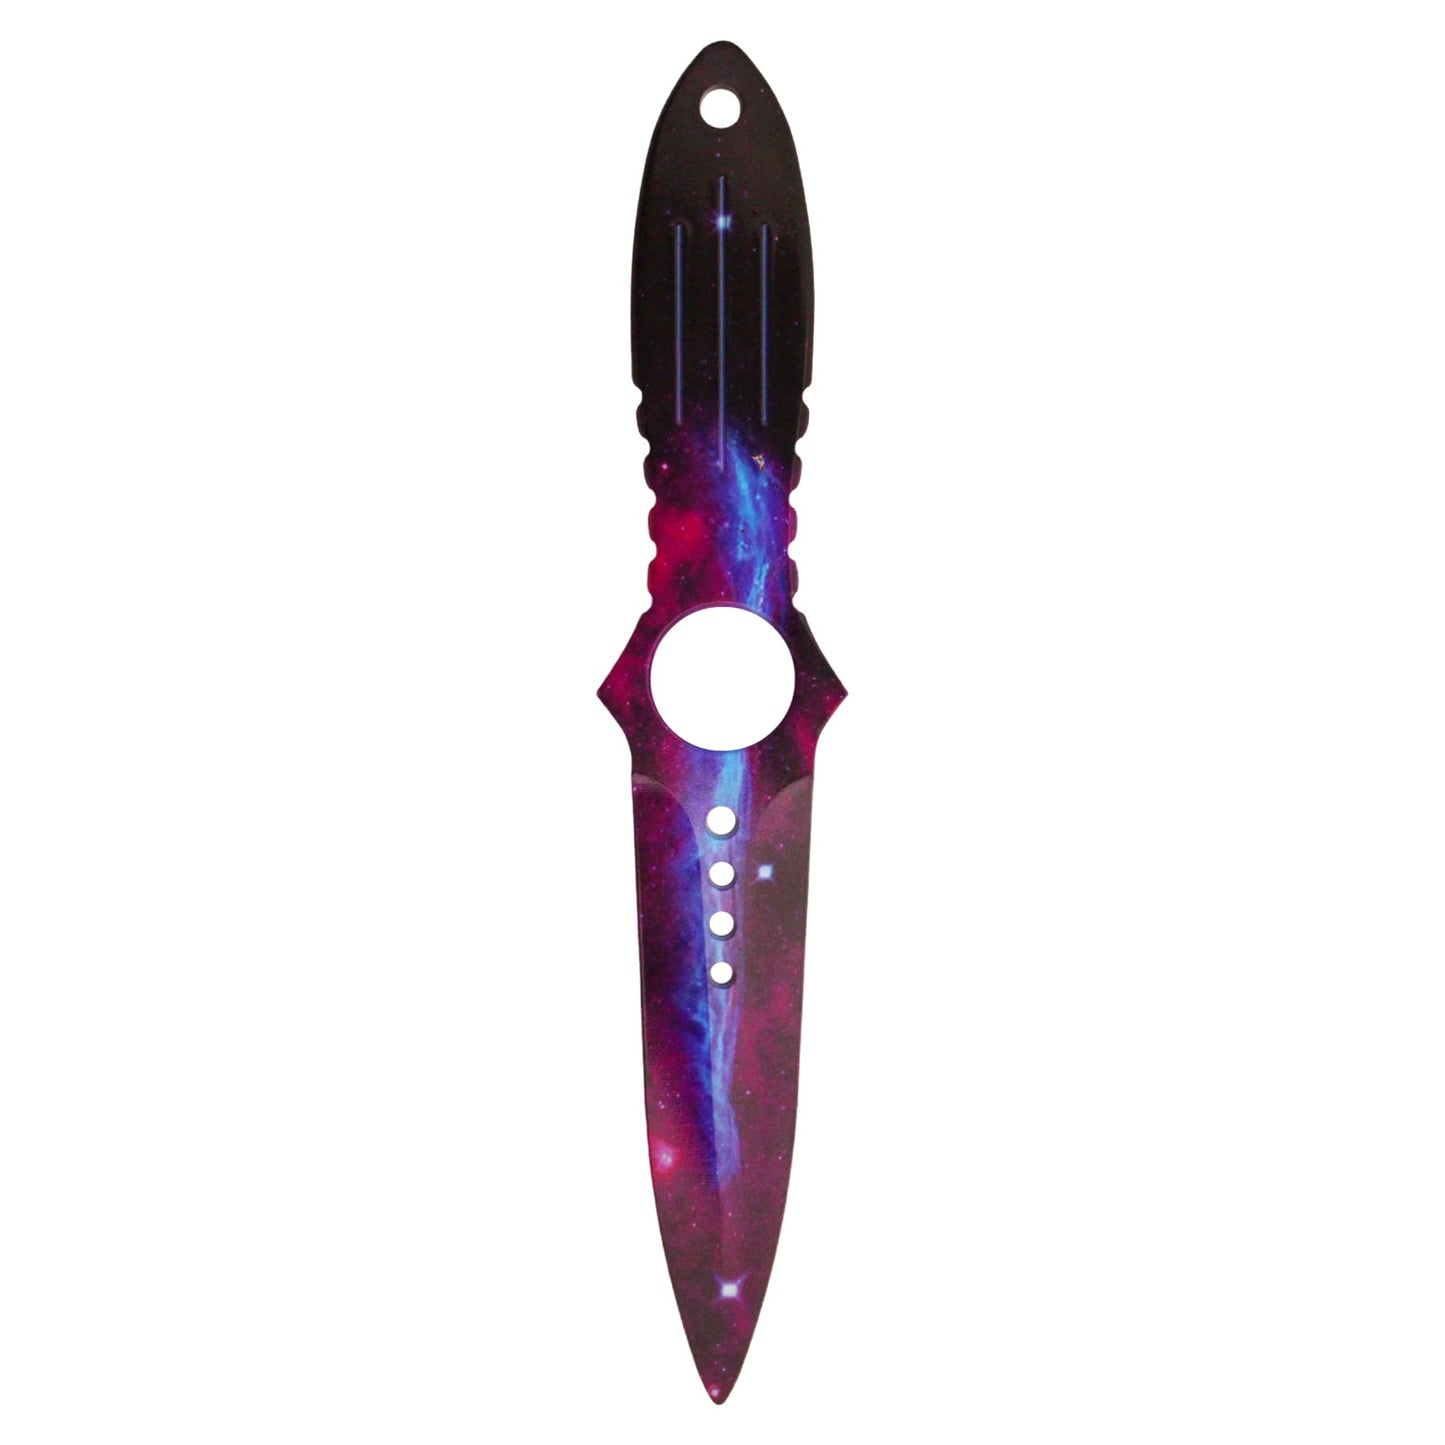 Andux Fixed Blade Skull Style Balisong Purple (ONLY Available in the United States)